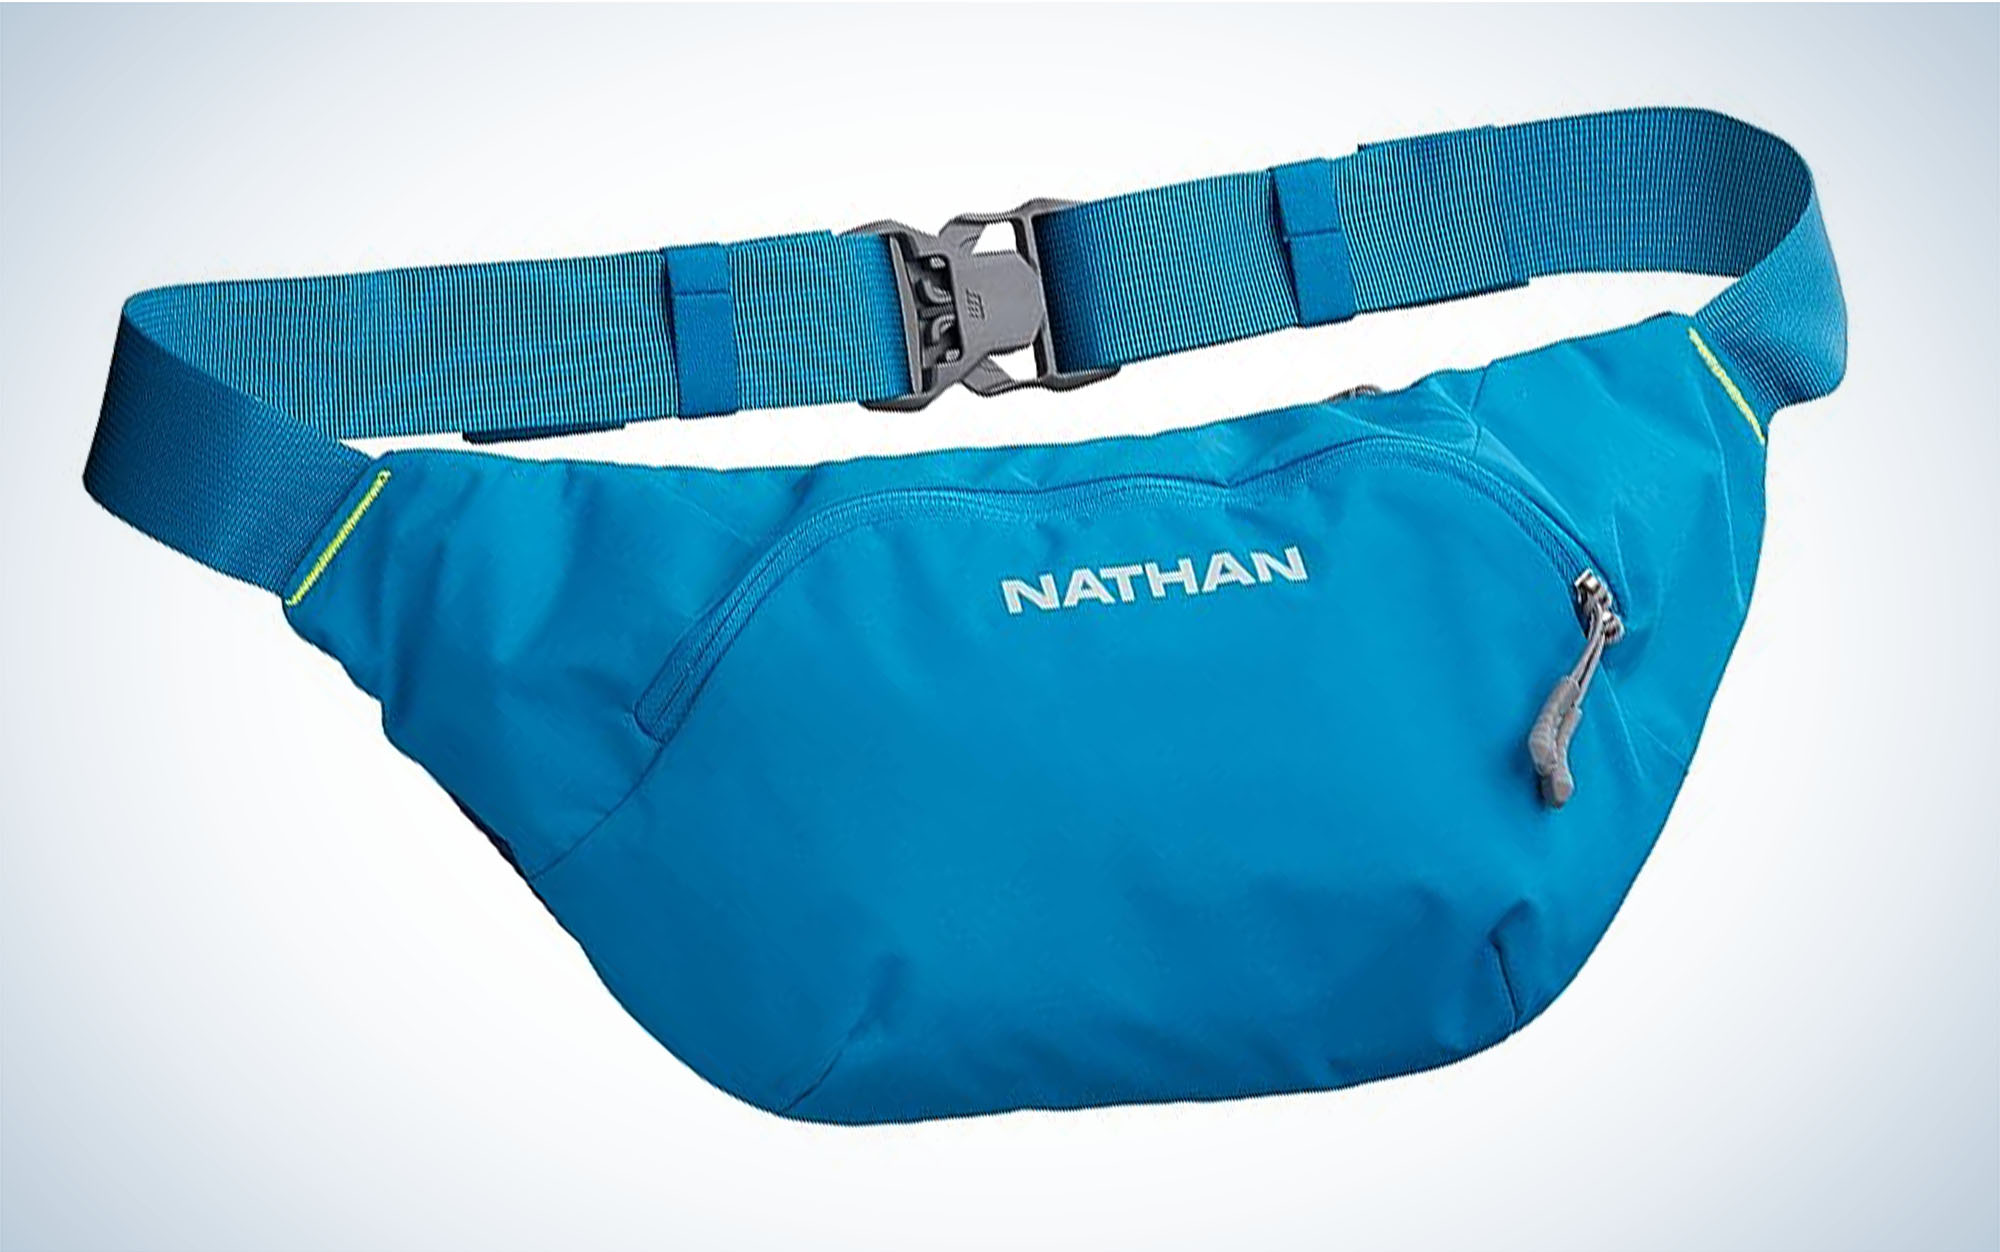 We tested the Nathan Limitless 2 Liter Sling.